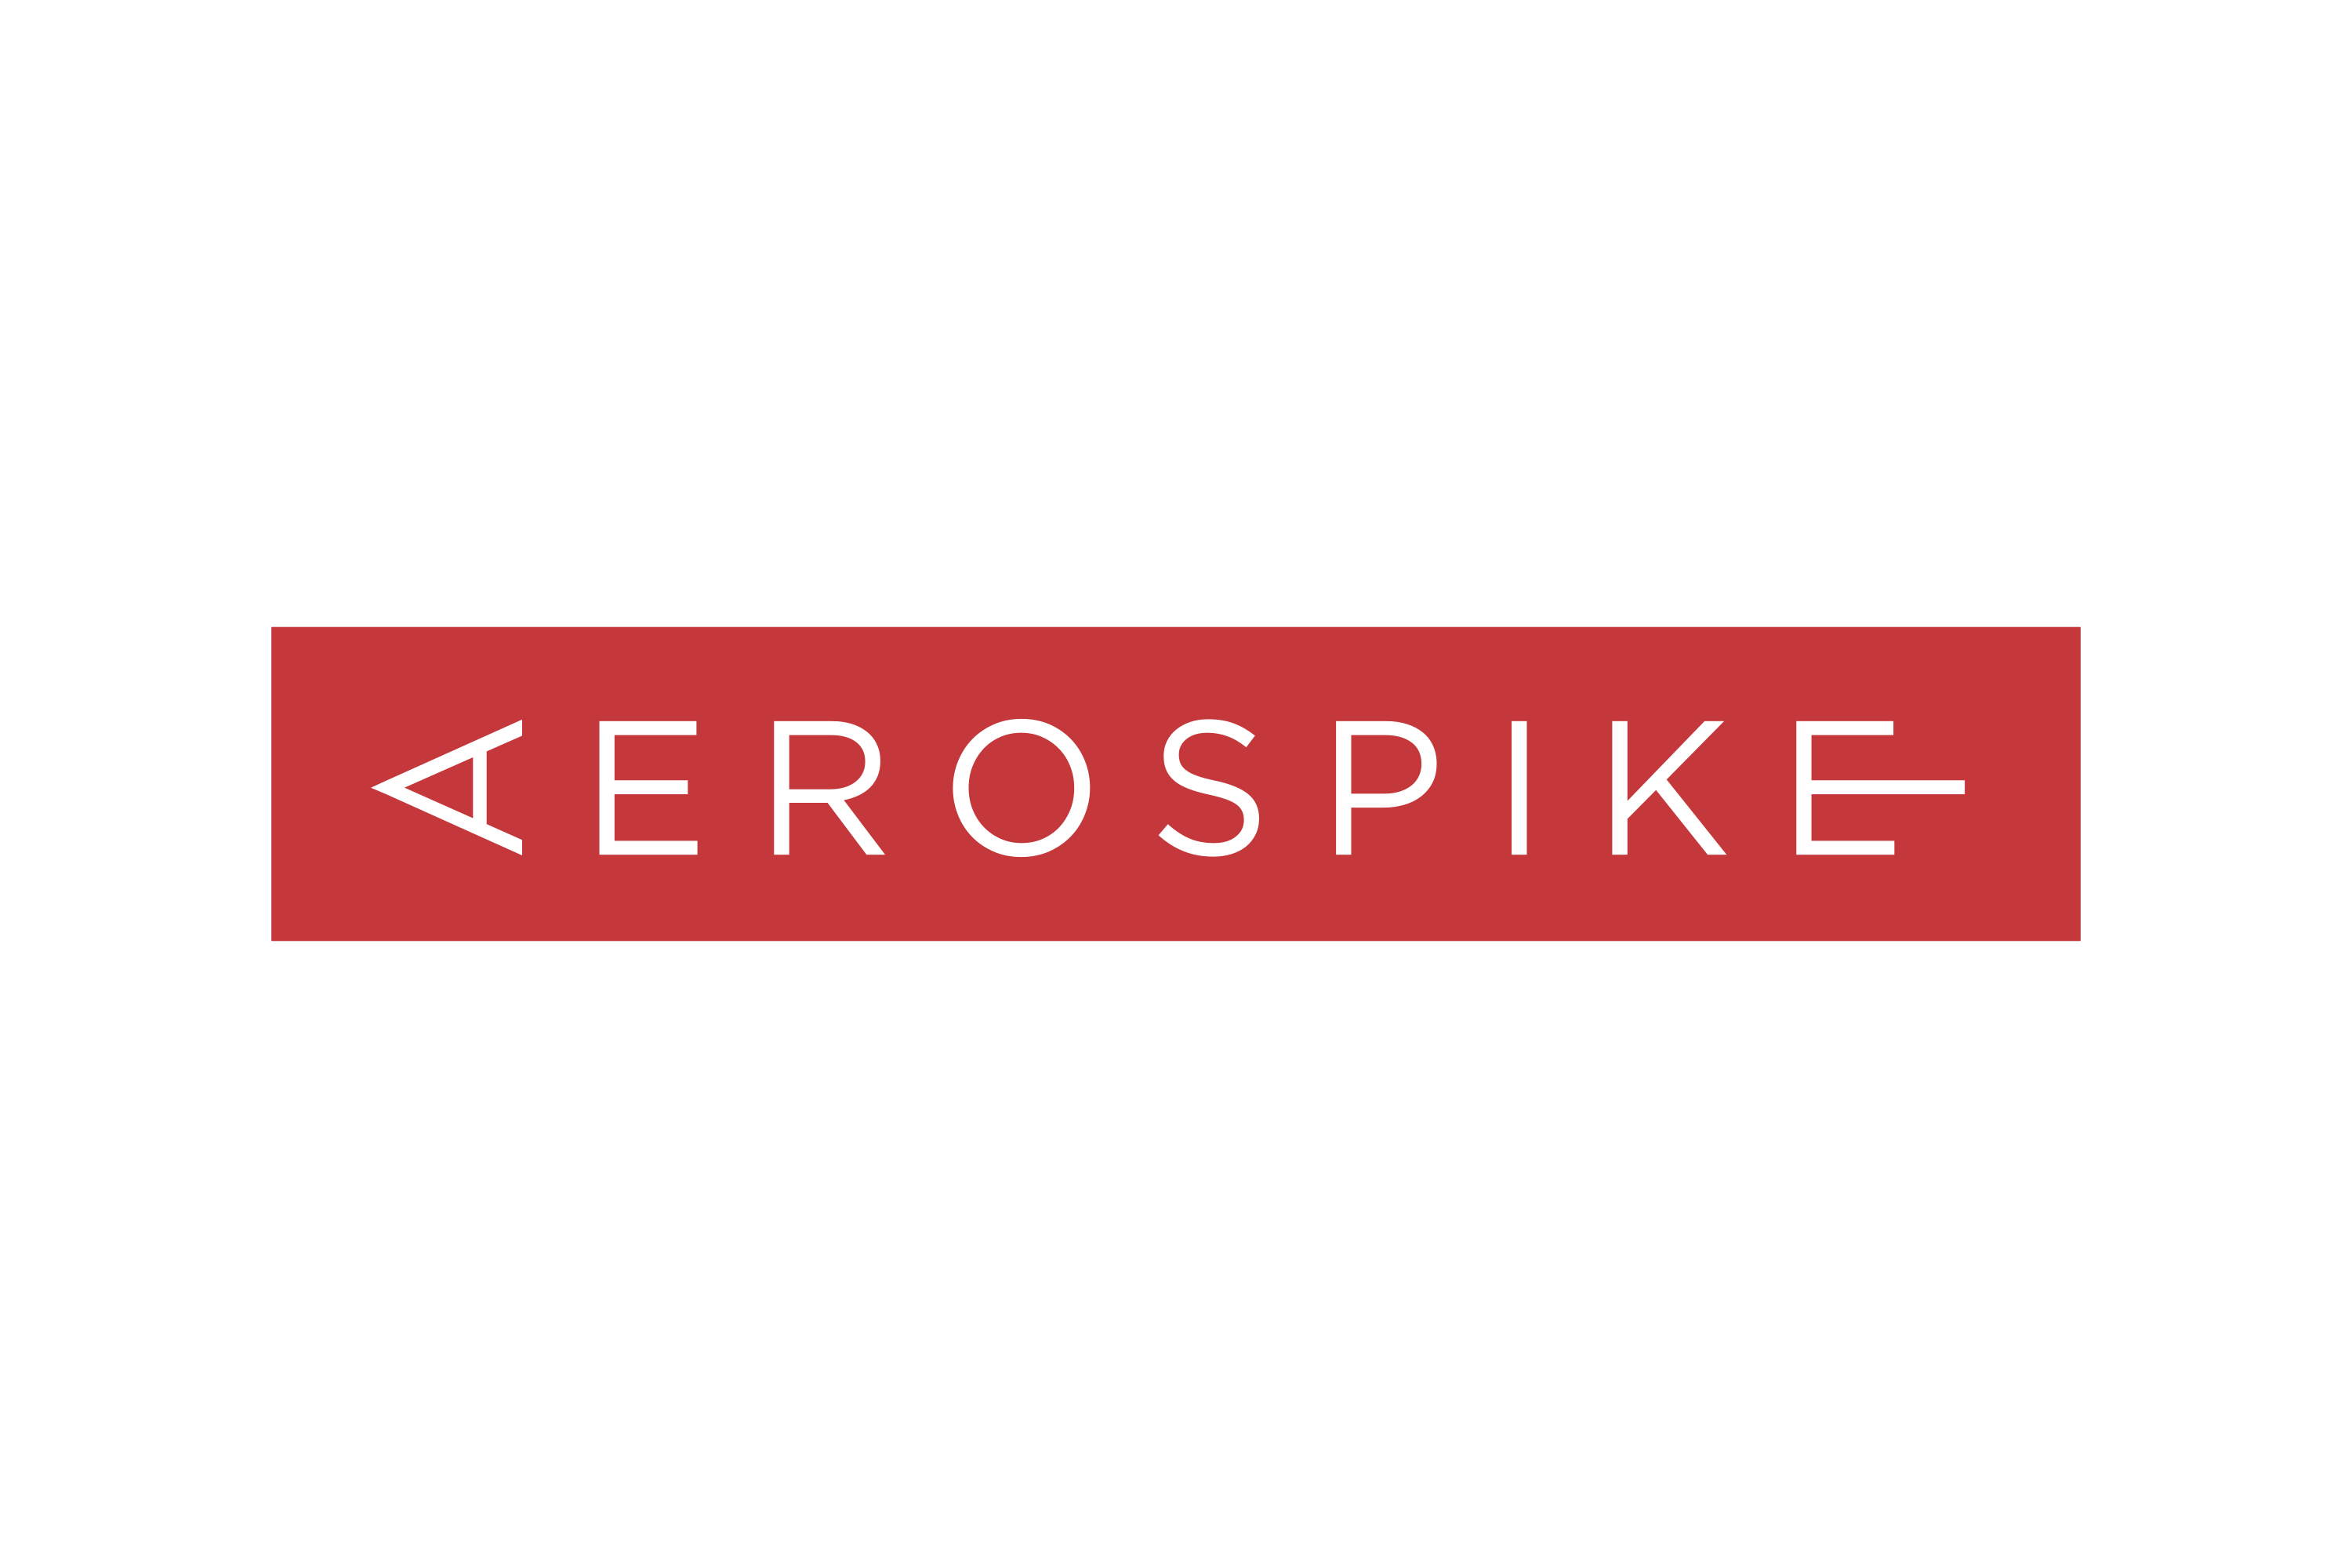 Aerospike Q2 2021 Is Best Quarter in Company’s History